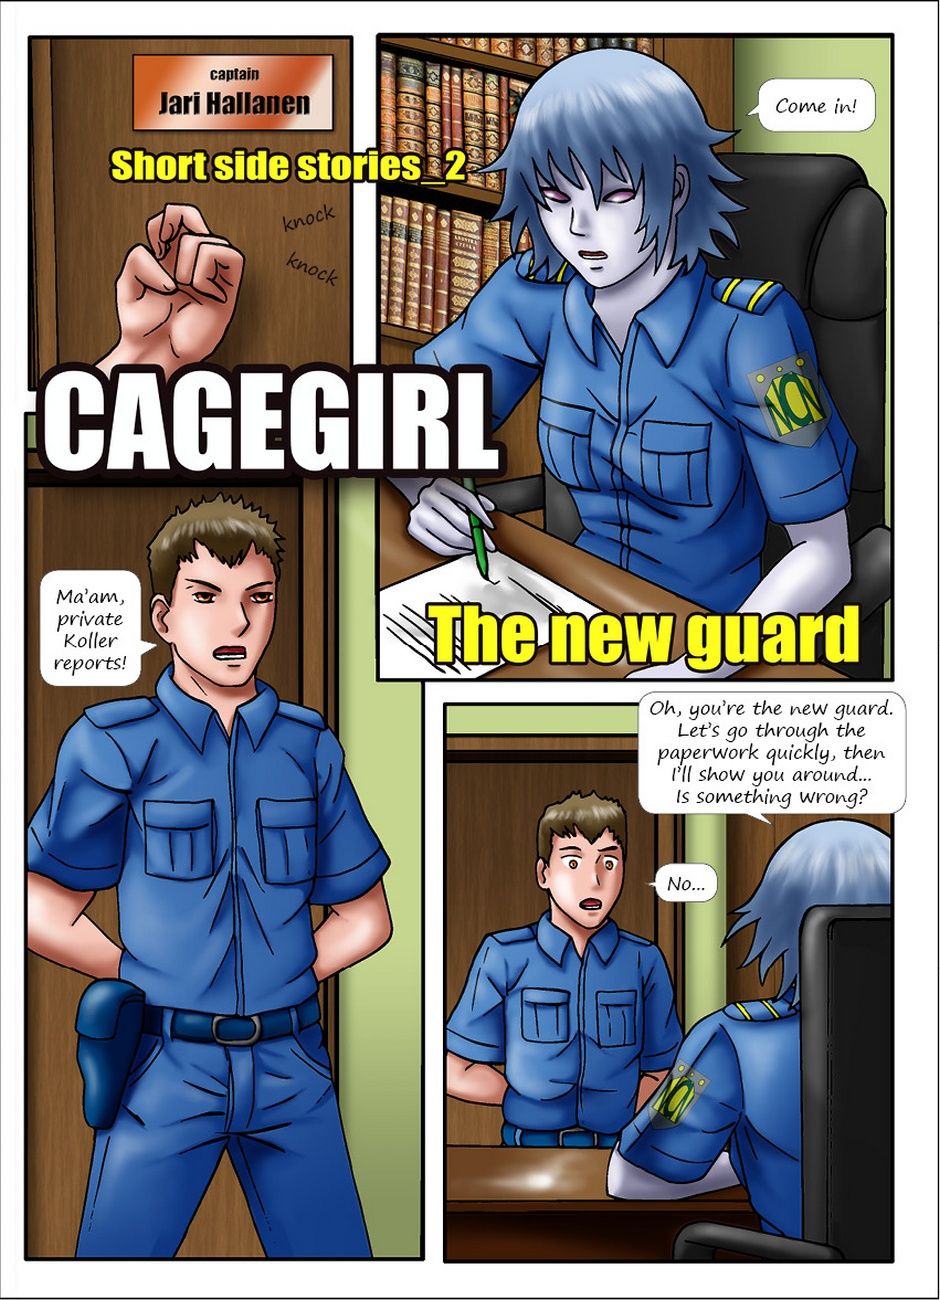 Cagegirl 2 - The New Guard page 2